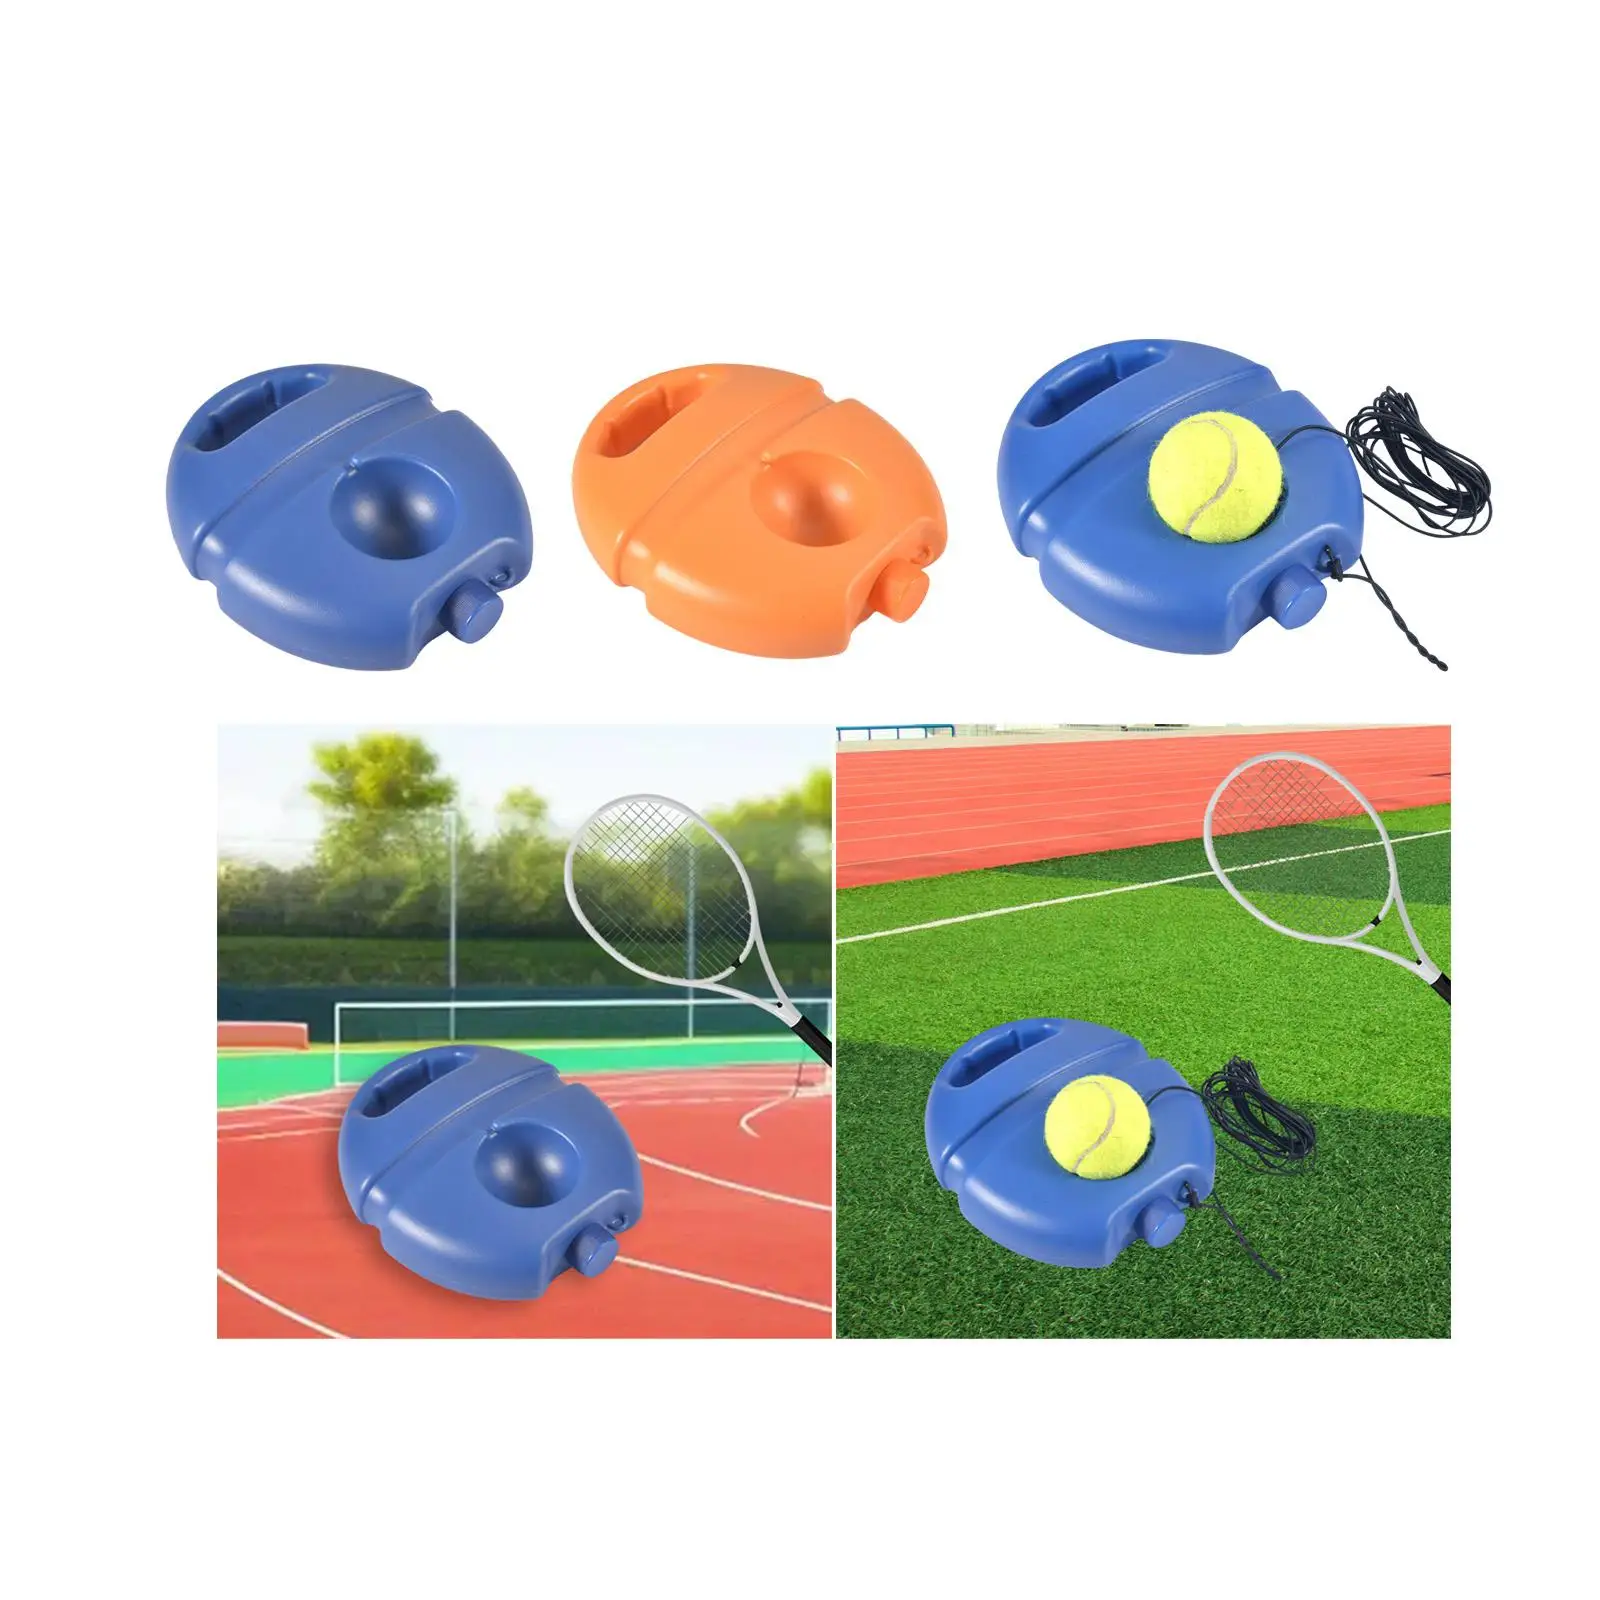 Tennis Trainer Base Professional Single Player Tennis Trainer for Kids Adults Beginners Practice Exercise Tool Sports Outdoor